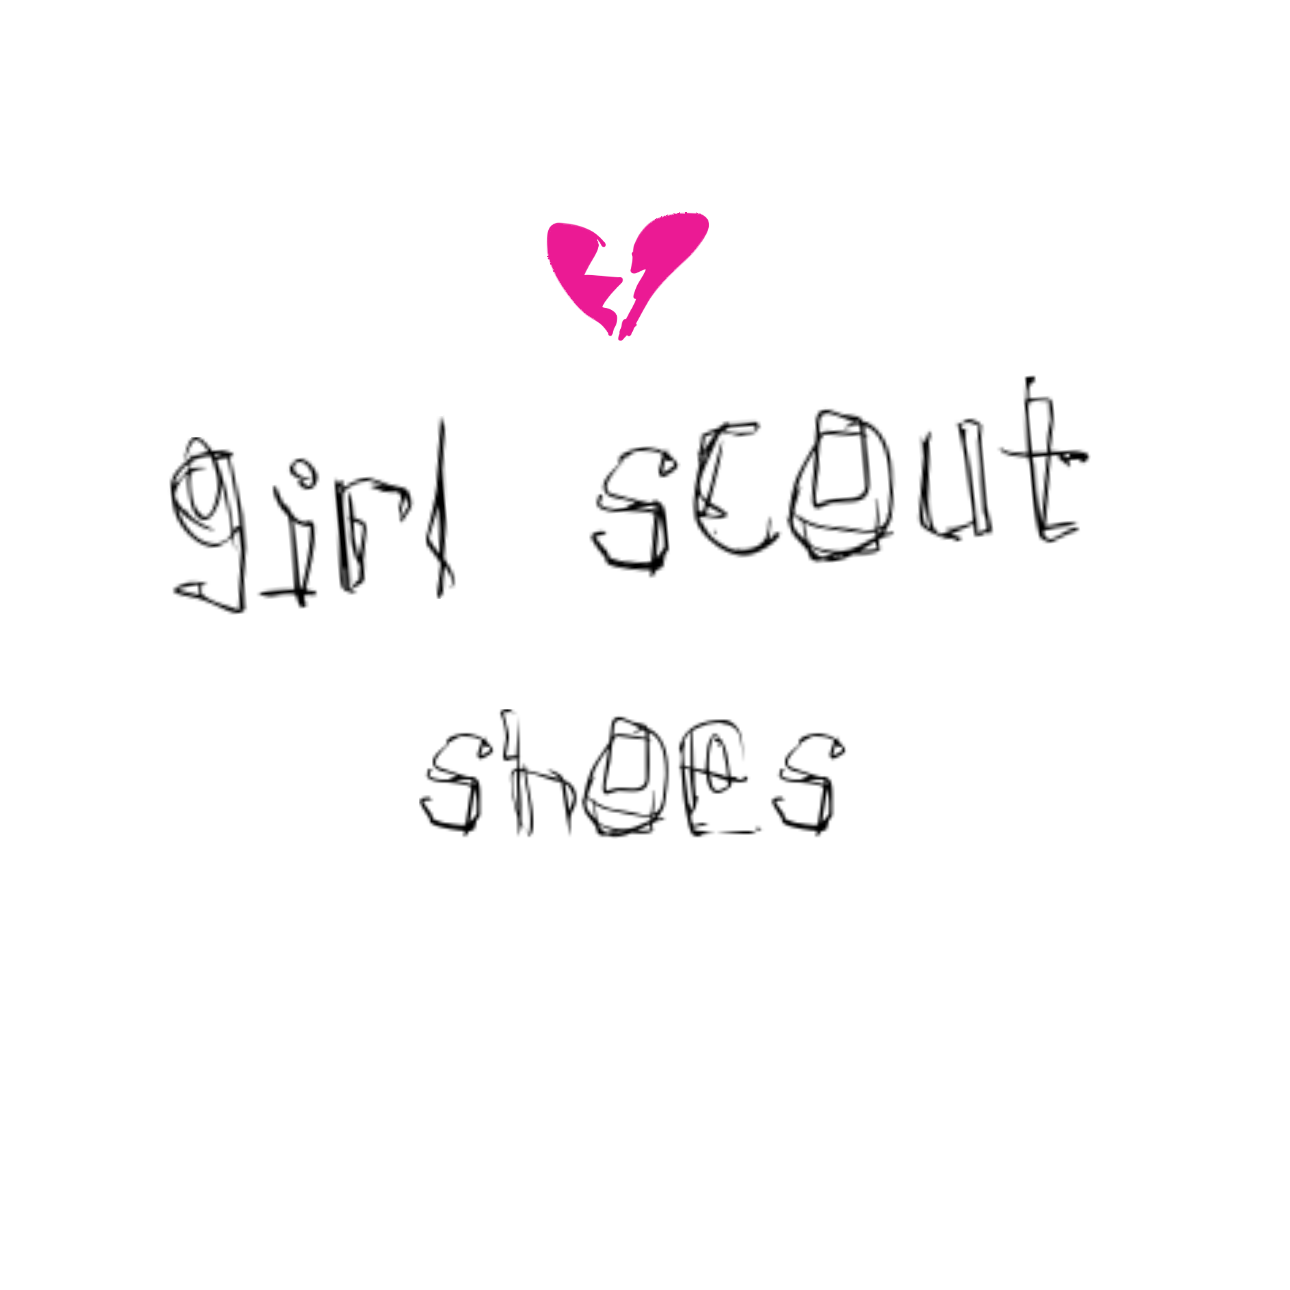 Girlscoutshoes